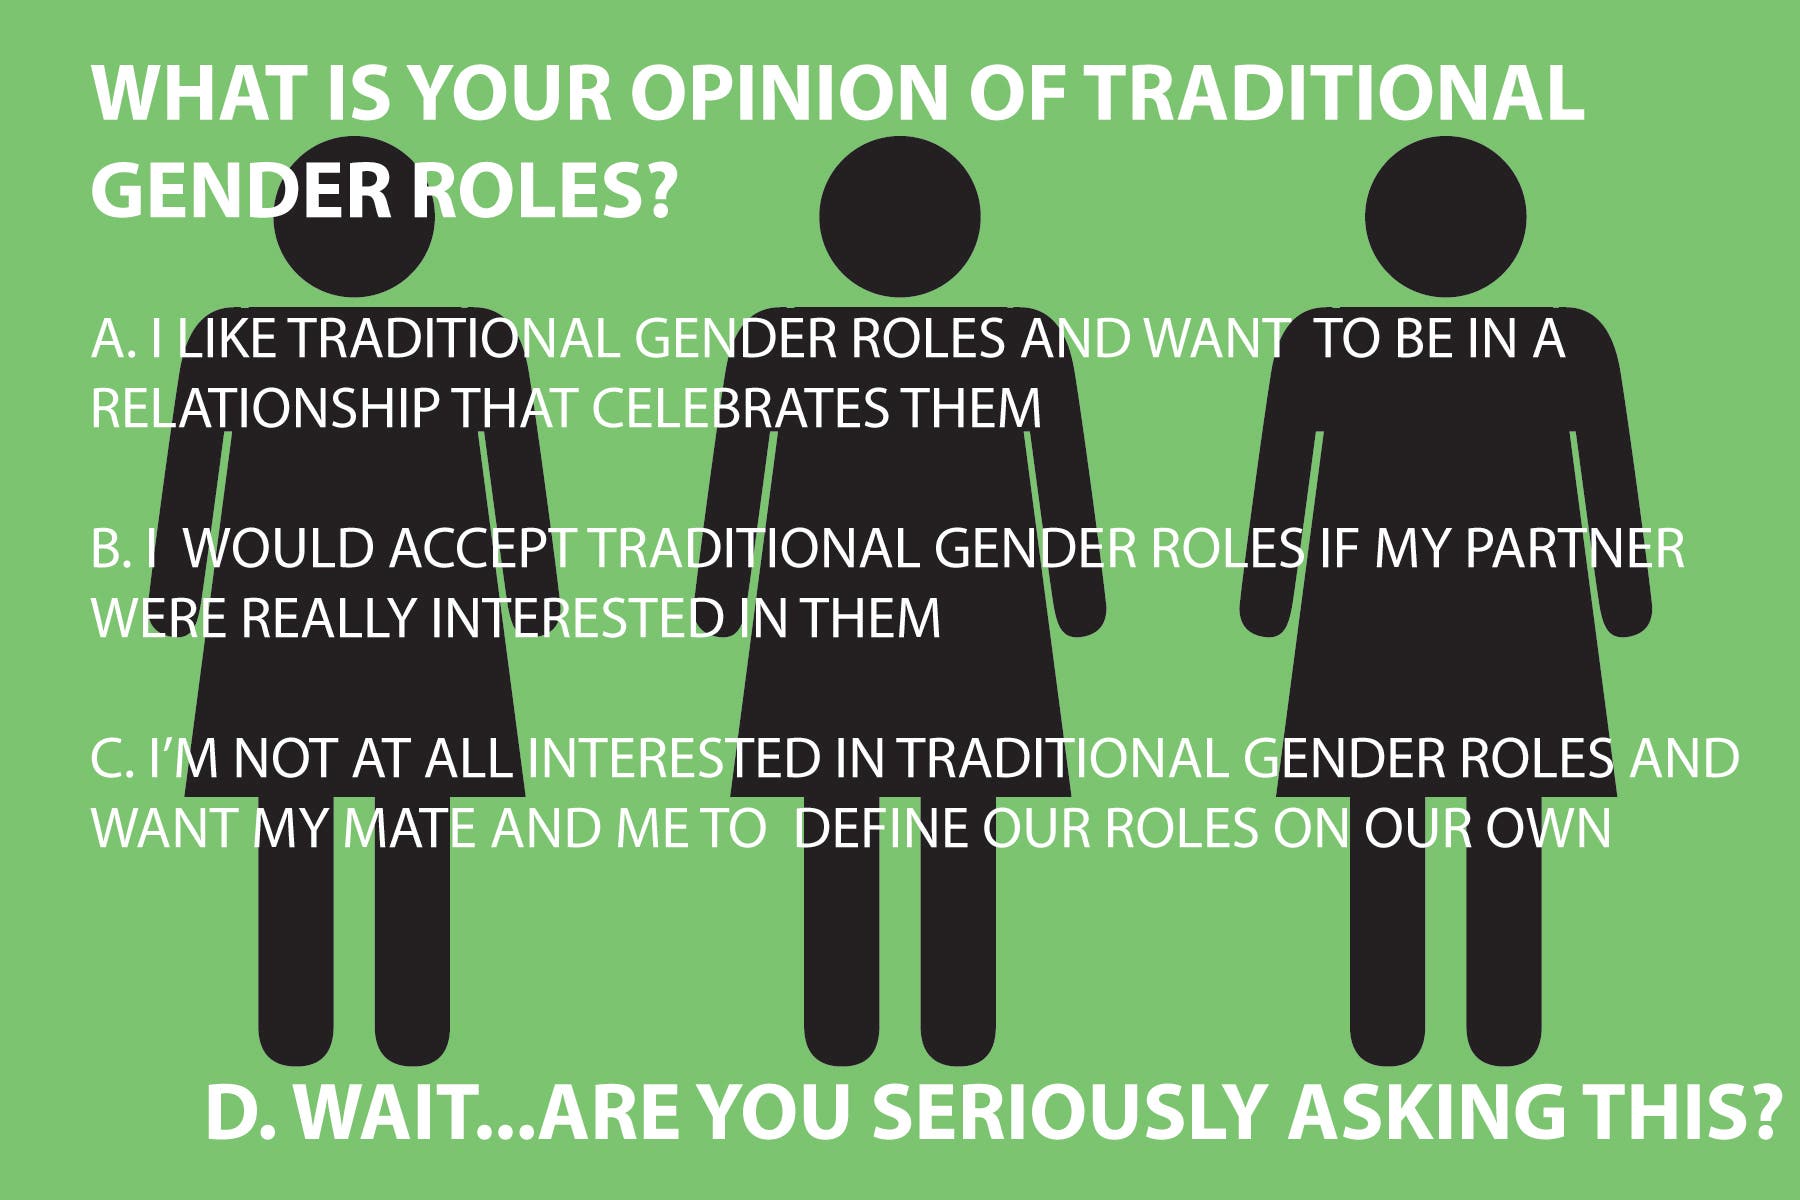  WHAT IS YOUR OPINION OF TRADITIONAL GENDER ROLES?